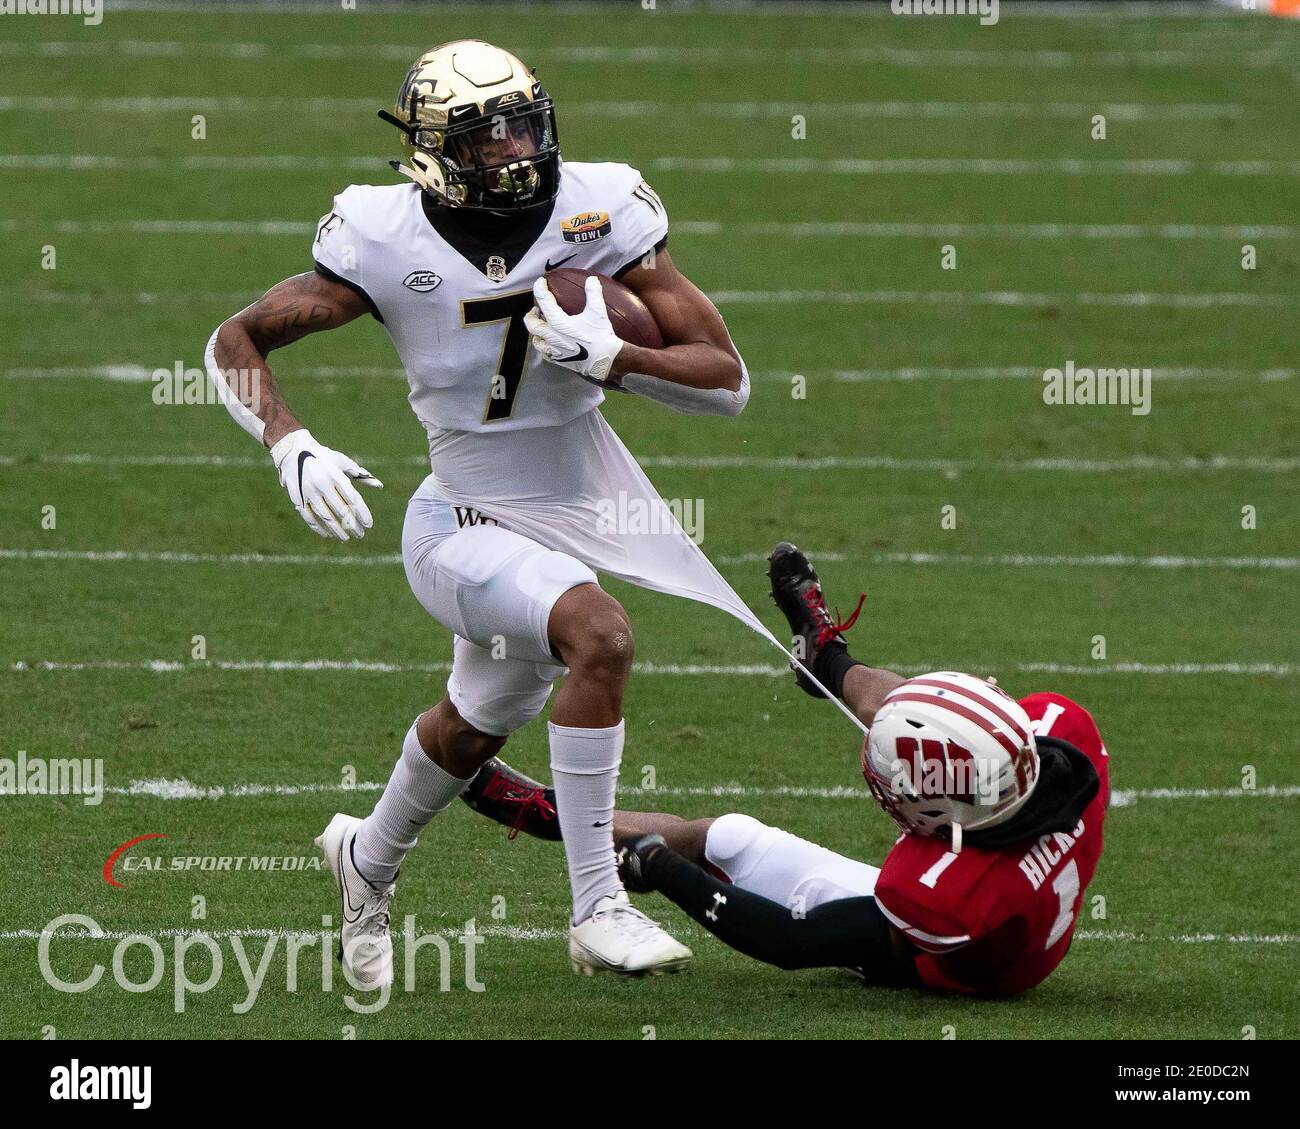 December 30, 2020: Wake Forest WR Donavon Greene (7) breaks away from Wisconsin CB Faion Hicks (1) during the DukeÕs Mayo Bowl football game between the Wake Forest Demon Deacons and the Wisconsin Badgers at Bank of America Stadium in Charlottesville, VA. Brian McWalters/CSM Stock Photo